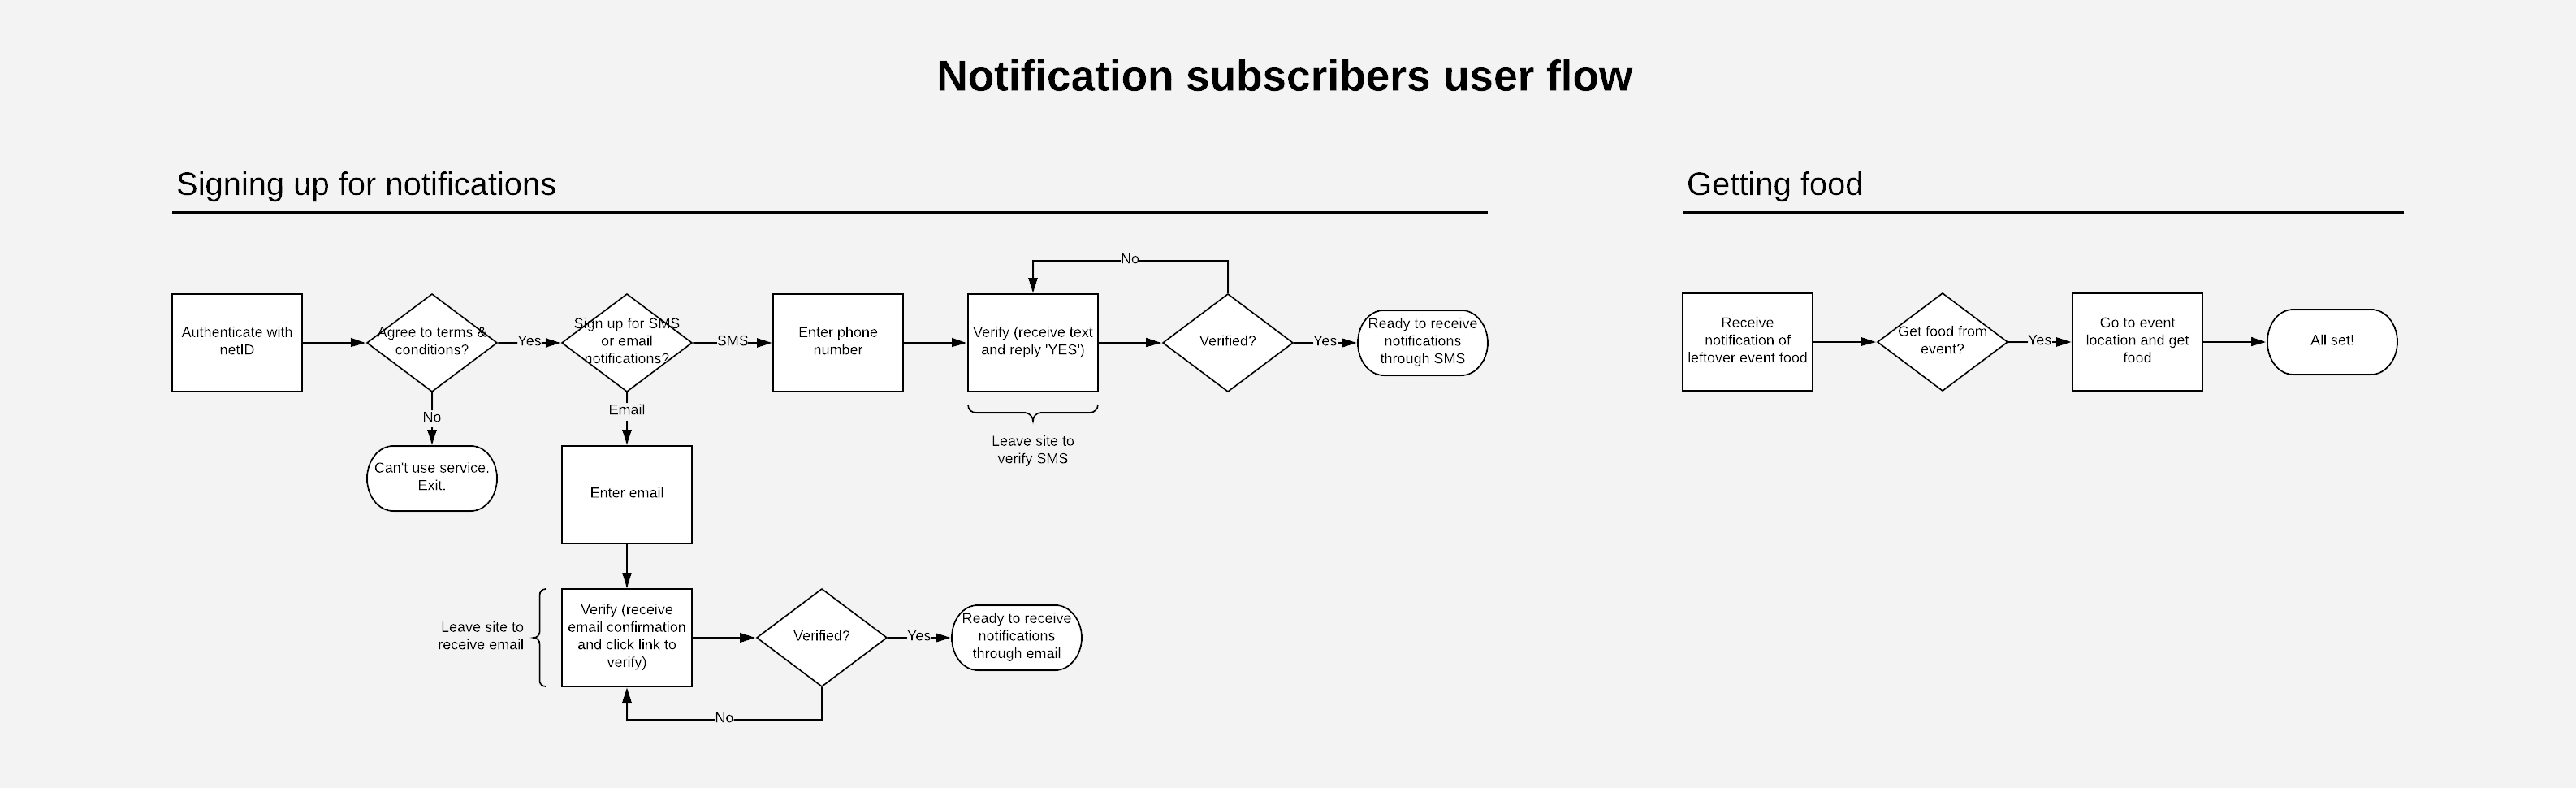 User flow diagram for subscribers.